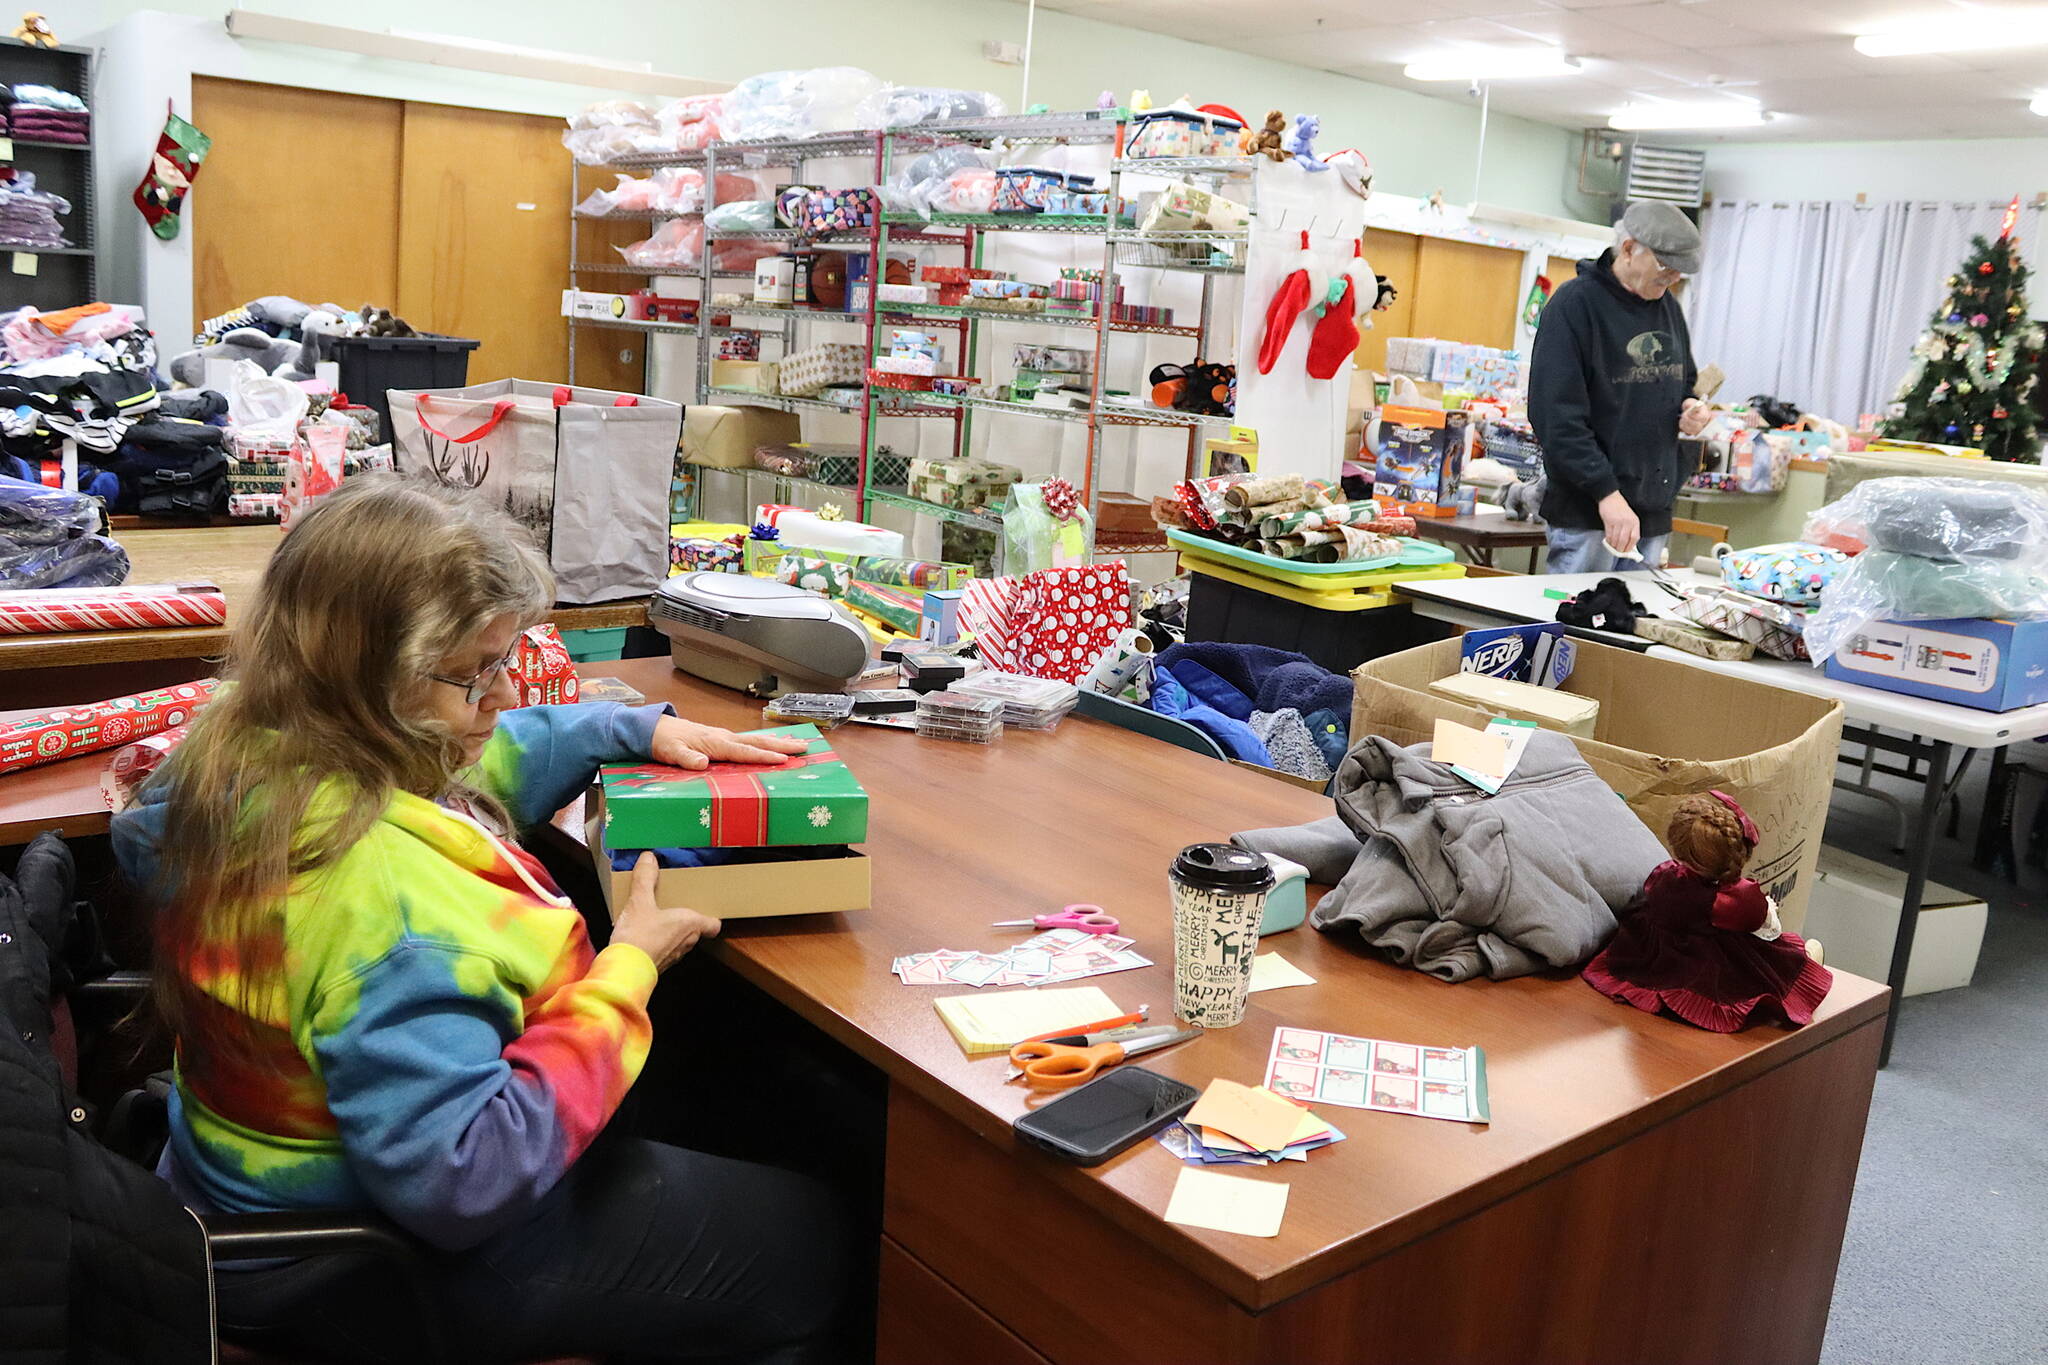 Martha Crockroft (foreground) and Jeff Marks wrap gifts for the annual Adopt-A-Family Christmas Gift Program at the St. Vincent de Paul Juneau complex on Saturday. (Mark Sabbatini / Juneau Empire)